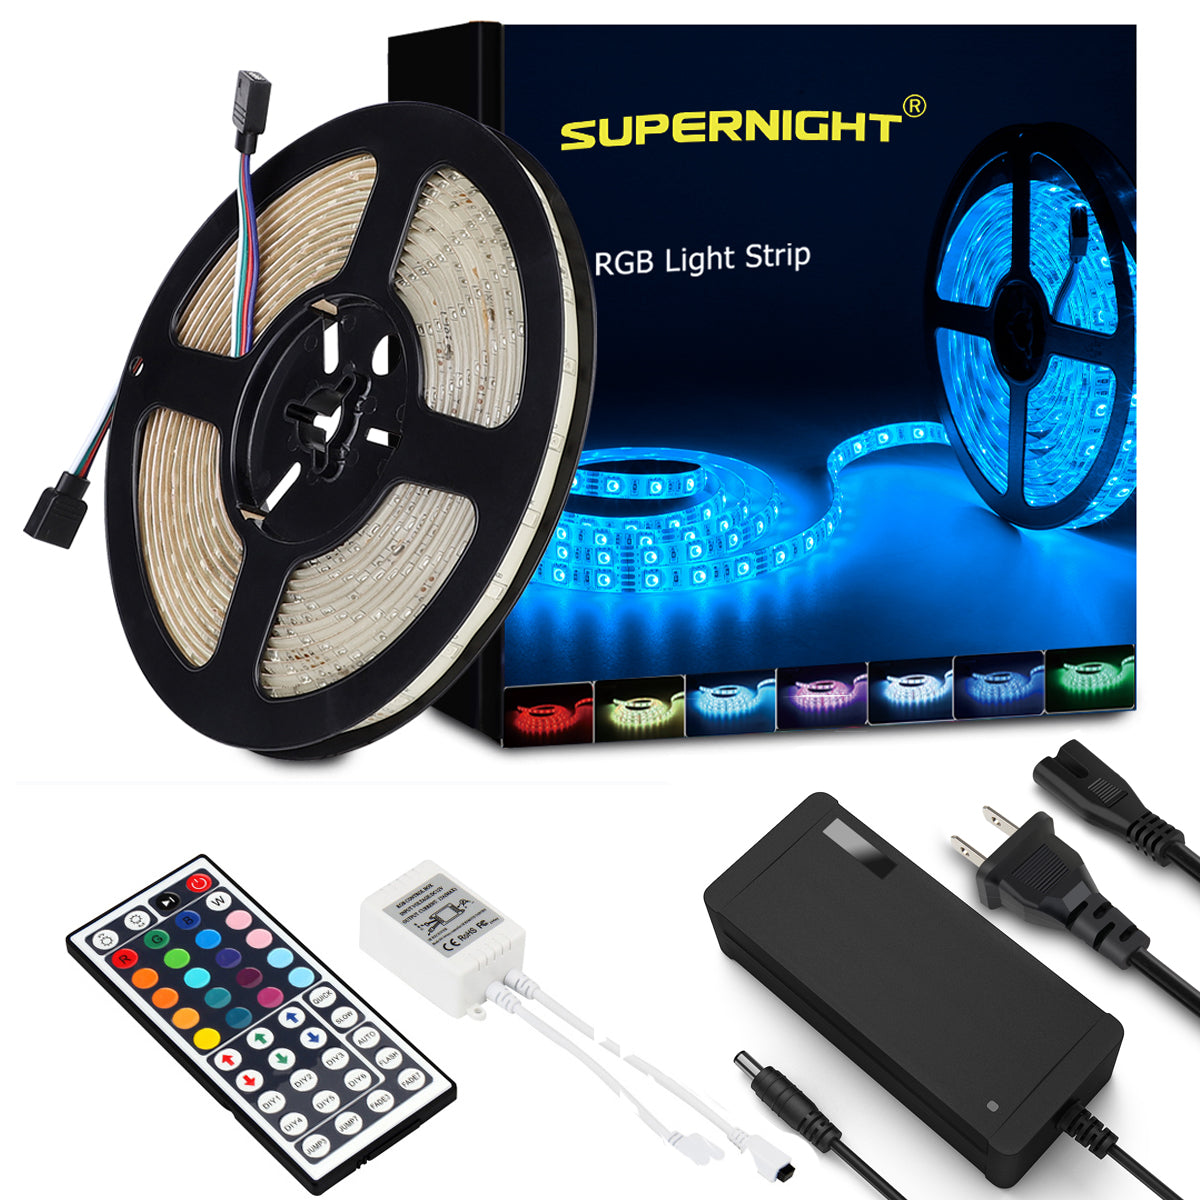 SUPERNIGHT LED Strip Lights, 16.4Ft RGB Color Changing SMD5050 300 LEDs Flexible Light Strip Waterproof Kit with 44 Key Remote Controller and 12V 5A Power Supply